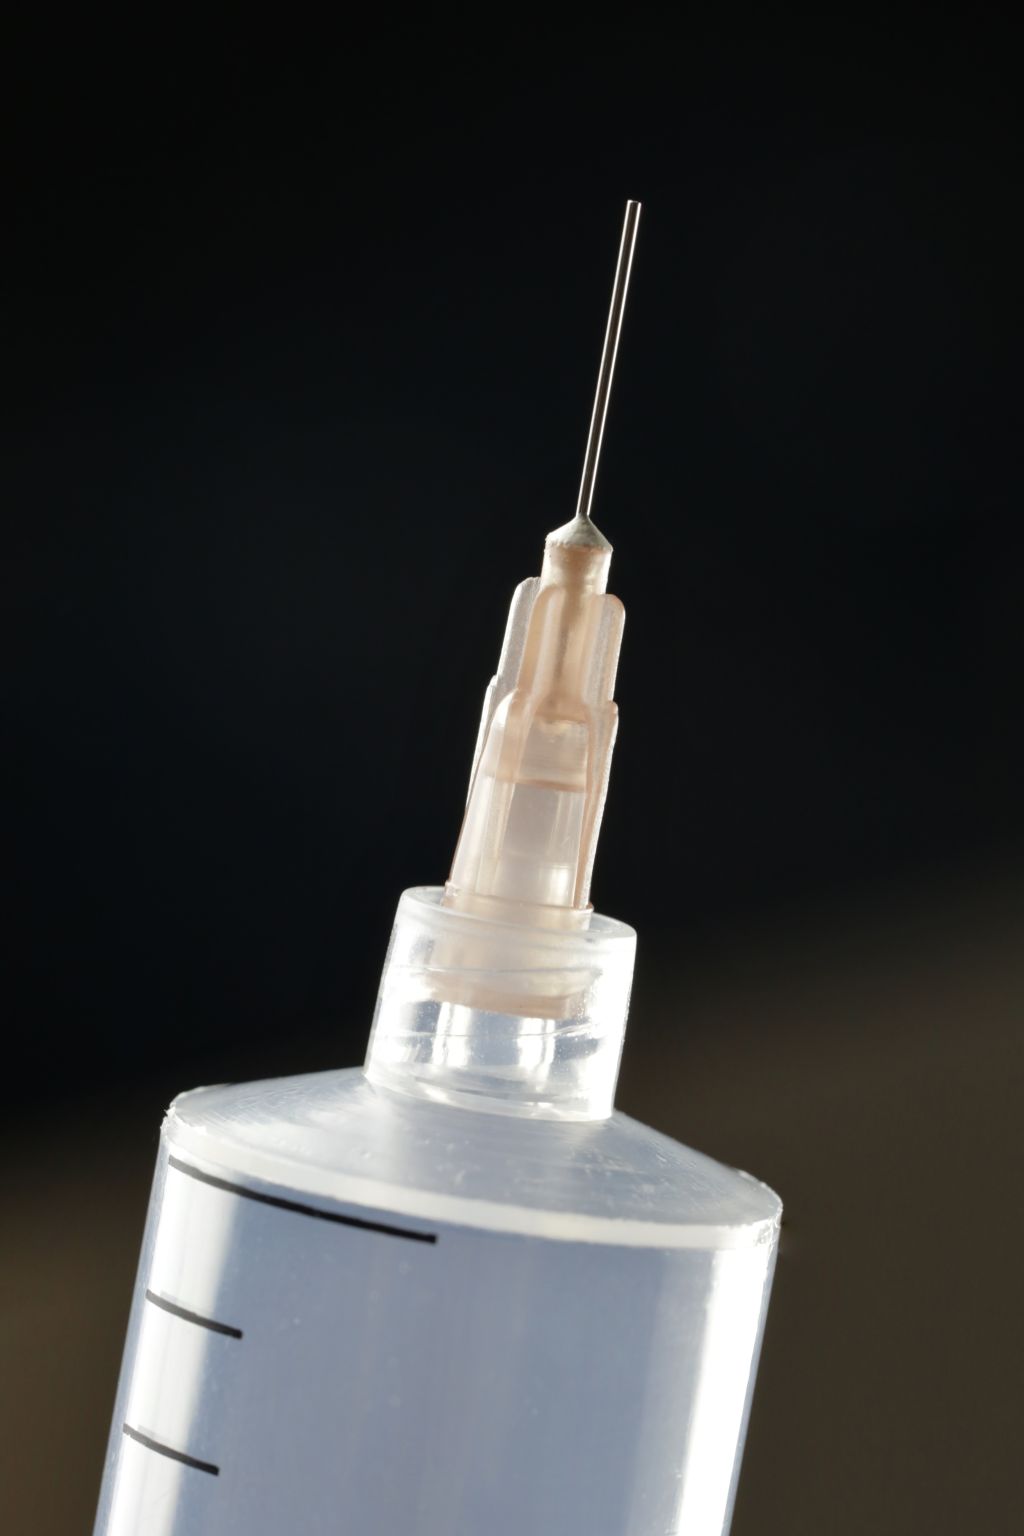 Close-up of a Hypodermic needle on a Medical syringe